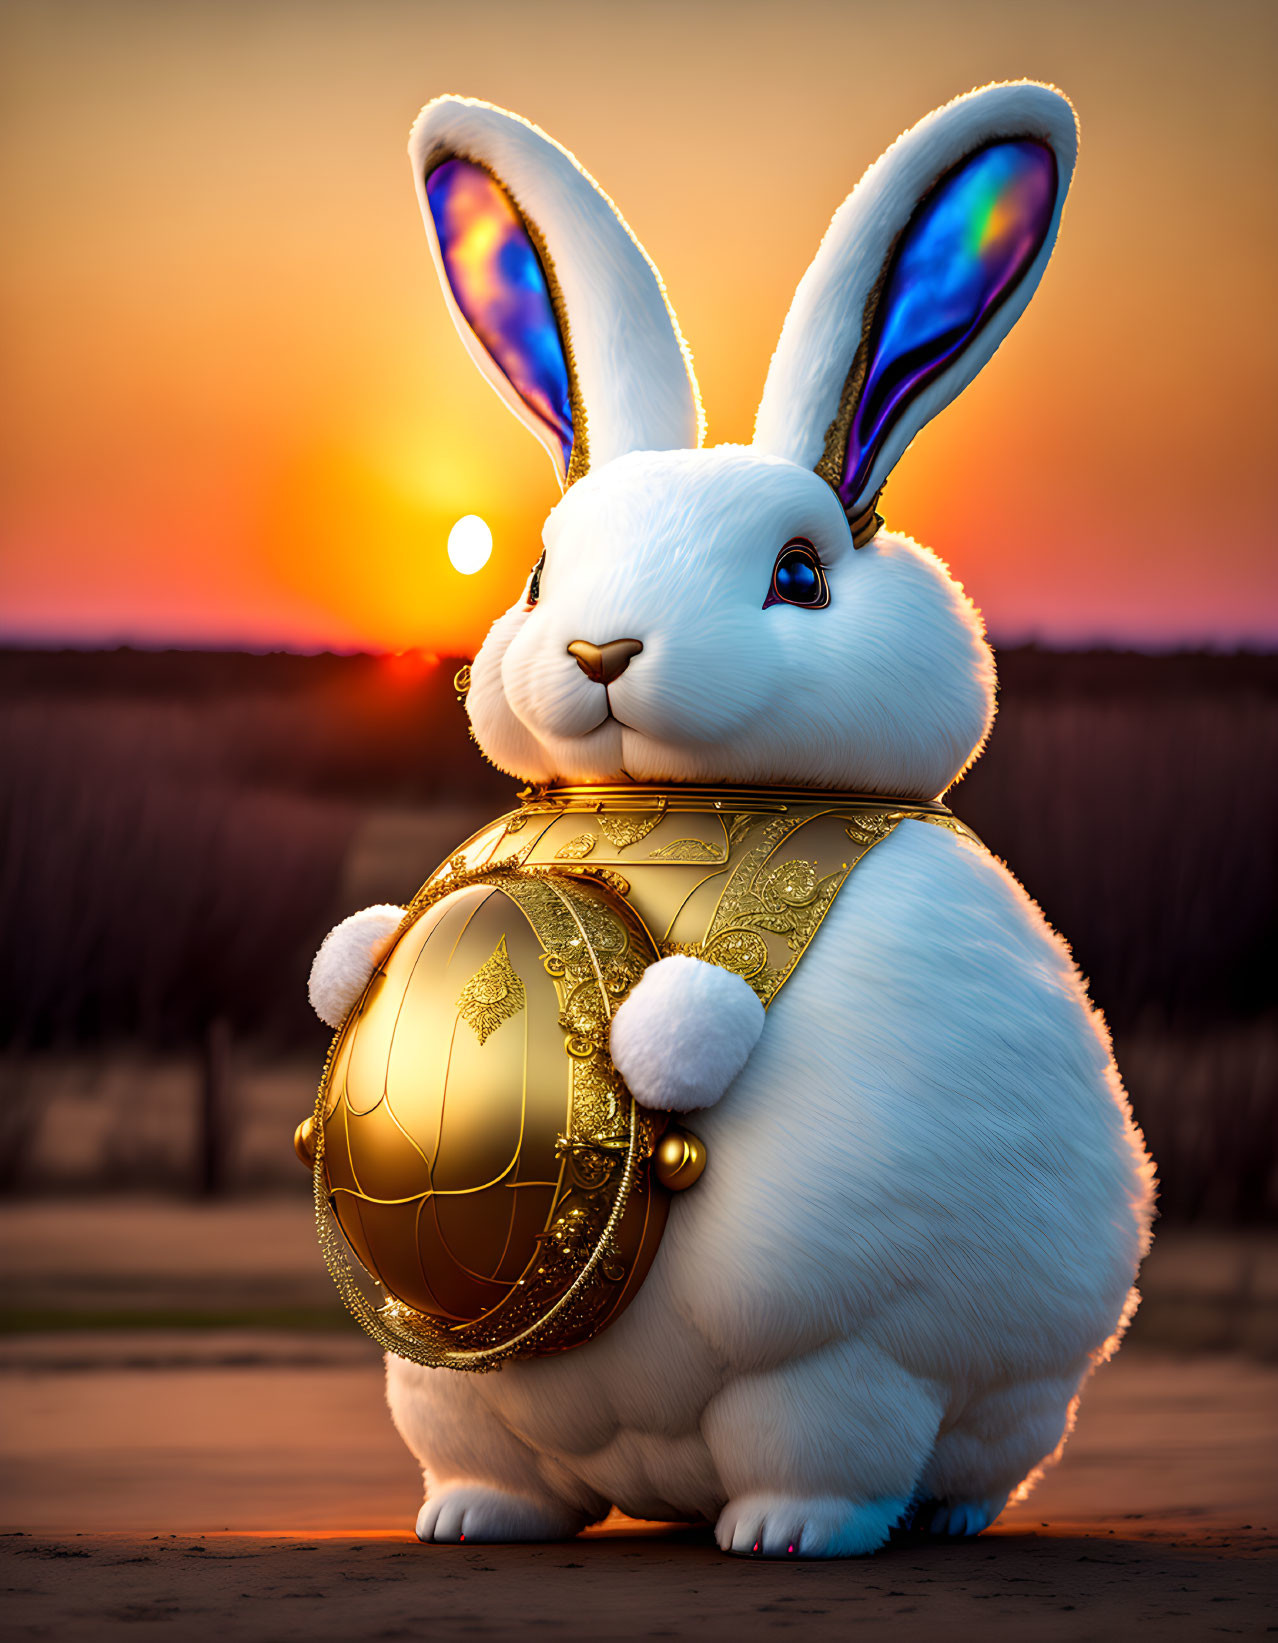 Plump white rabbit with colorful ears holding golden ornament at sunset